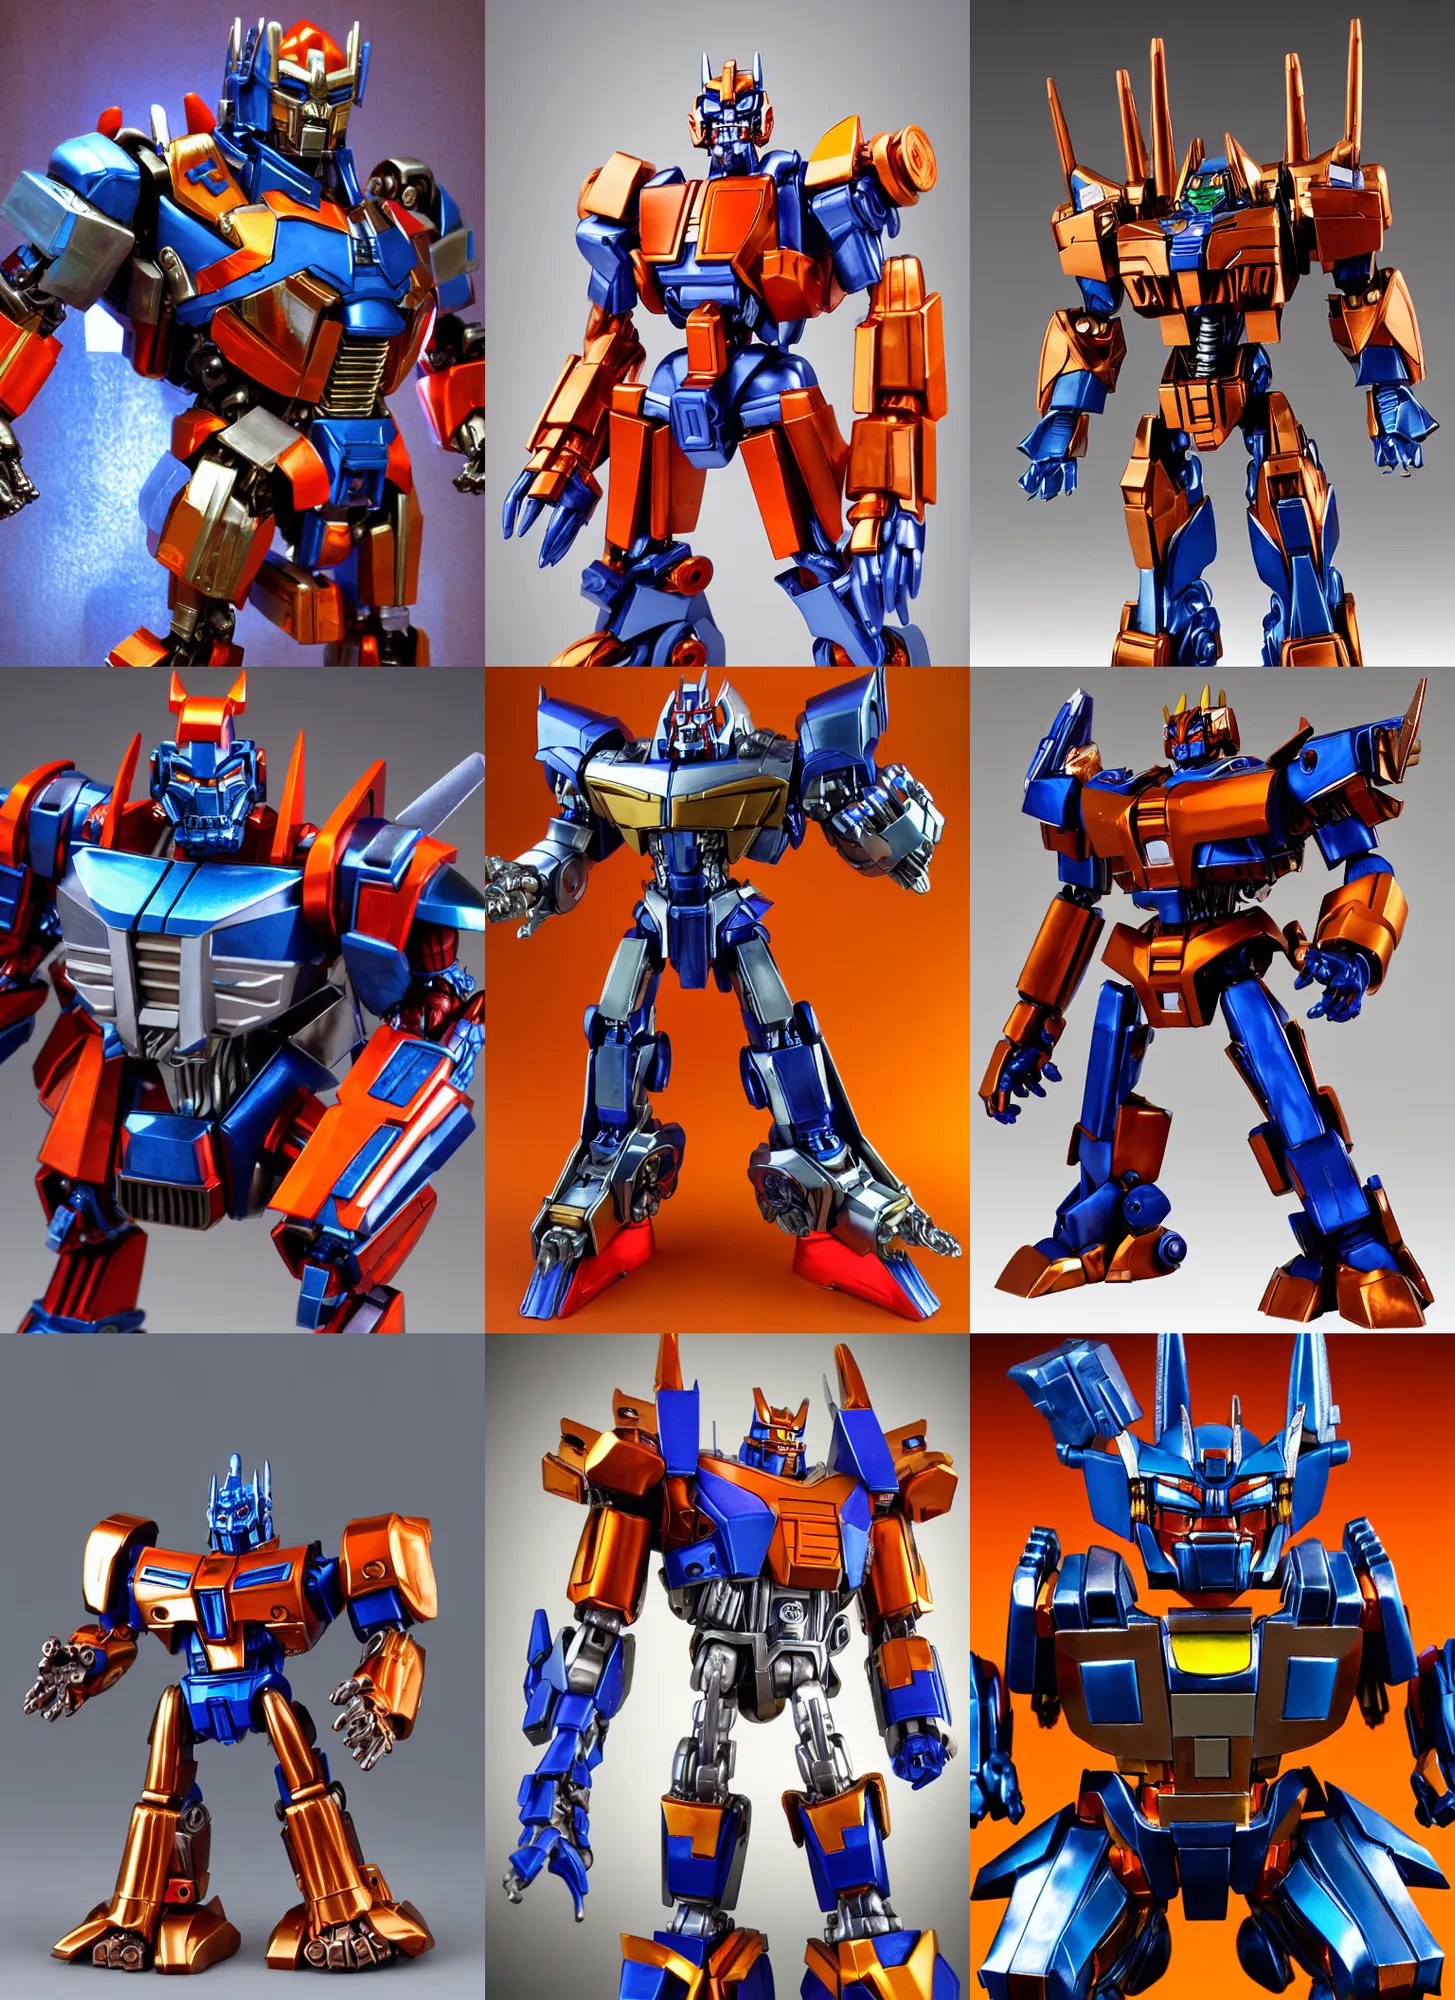 Prompt: dynamic character portrait of chrome optimal optimus from beast wars in robot mode, beast wars, beast wars, transmetal, transmetal ii, transmetal toy, transmetal toys, beast wars toy, beast wars toys, chrome orange and blue color scheme, chromed metal, metallic chrome paint, metallic chrome, metallic paint, chromed plastic, transformers, transformers beast wars